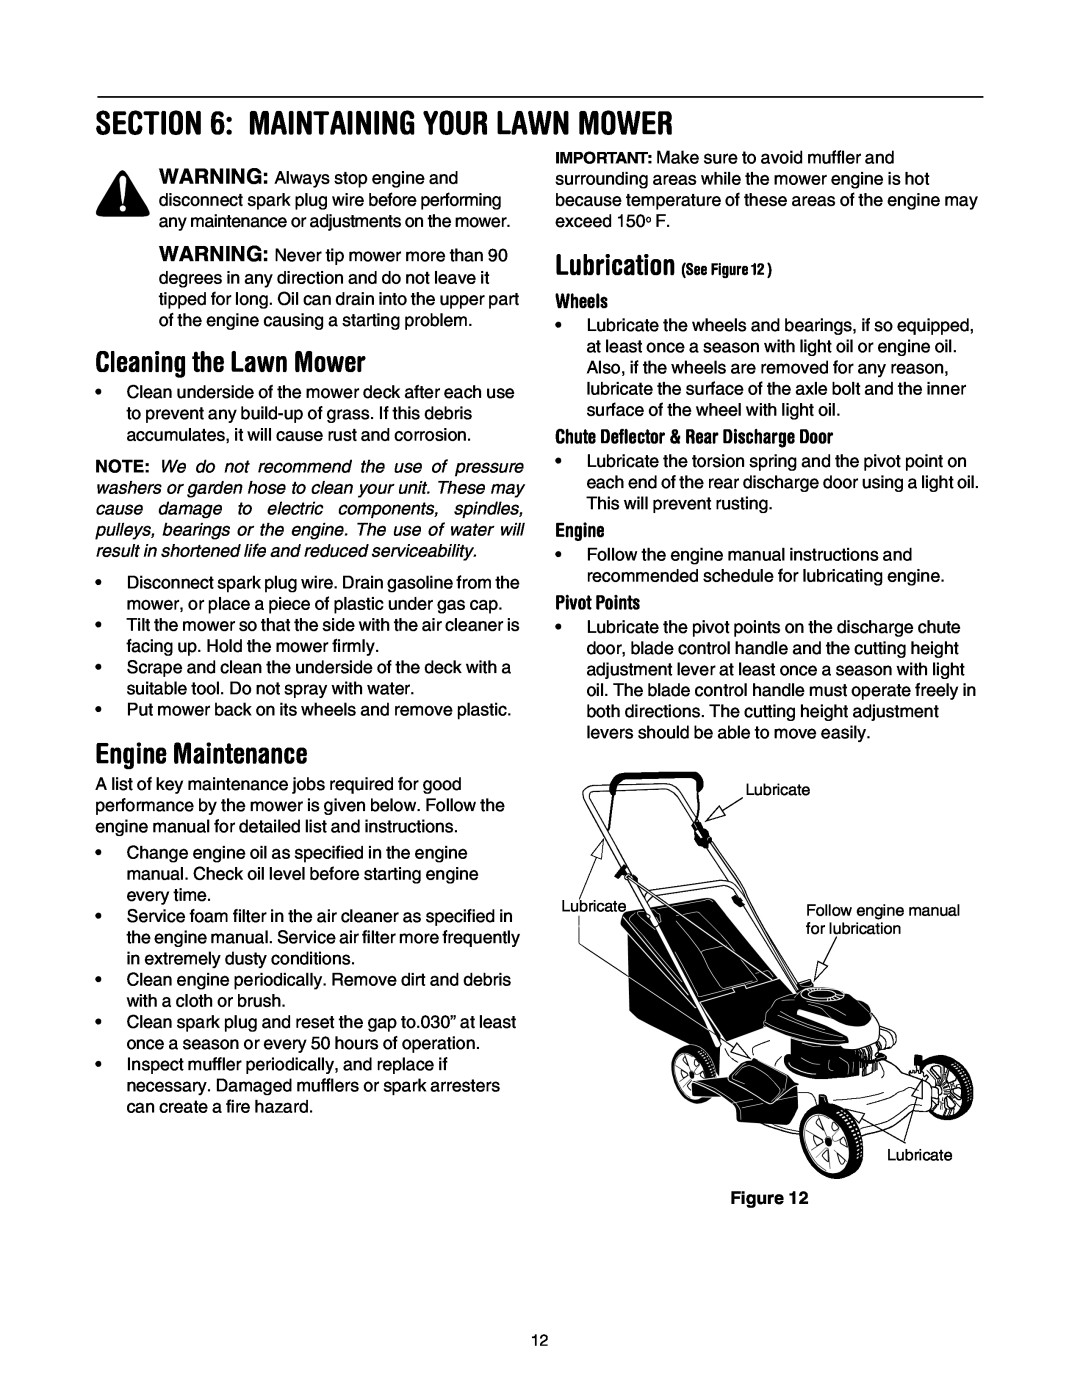 MTD 435 manual Maintaining Your Lawn Mower, Cleaning the Lawn Mower, Engine Maintenance, Wheels, Pivot Points 